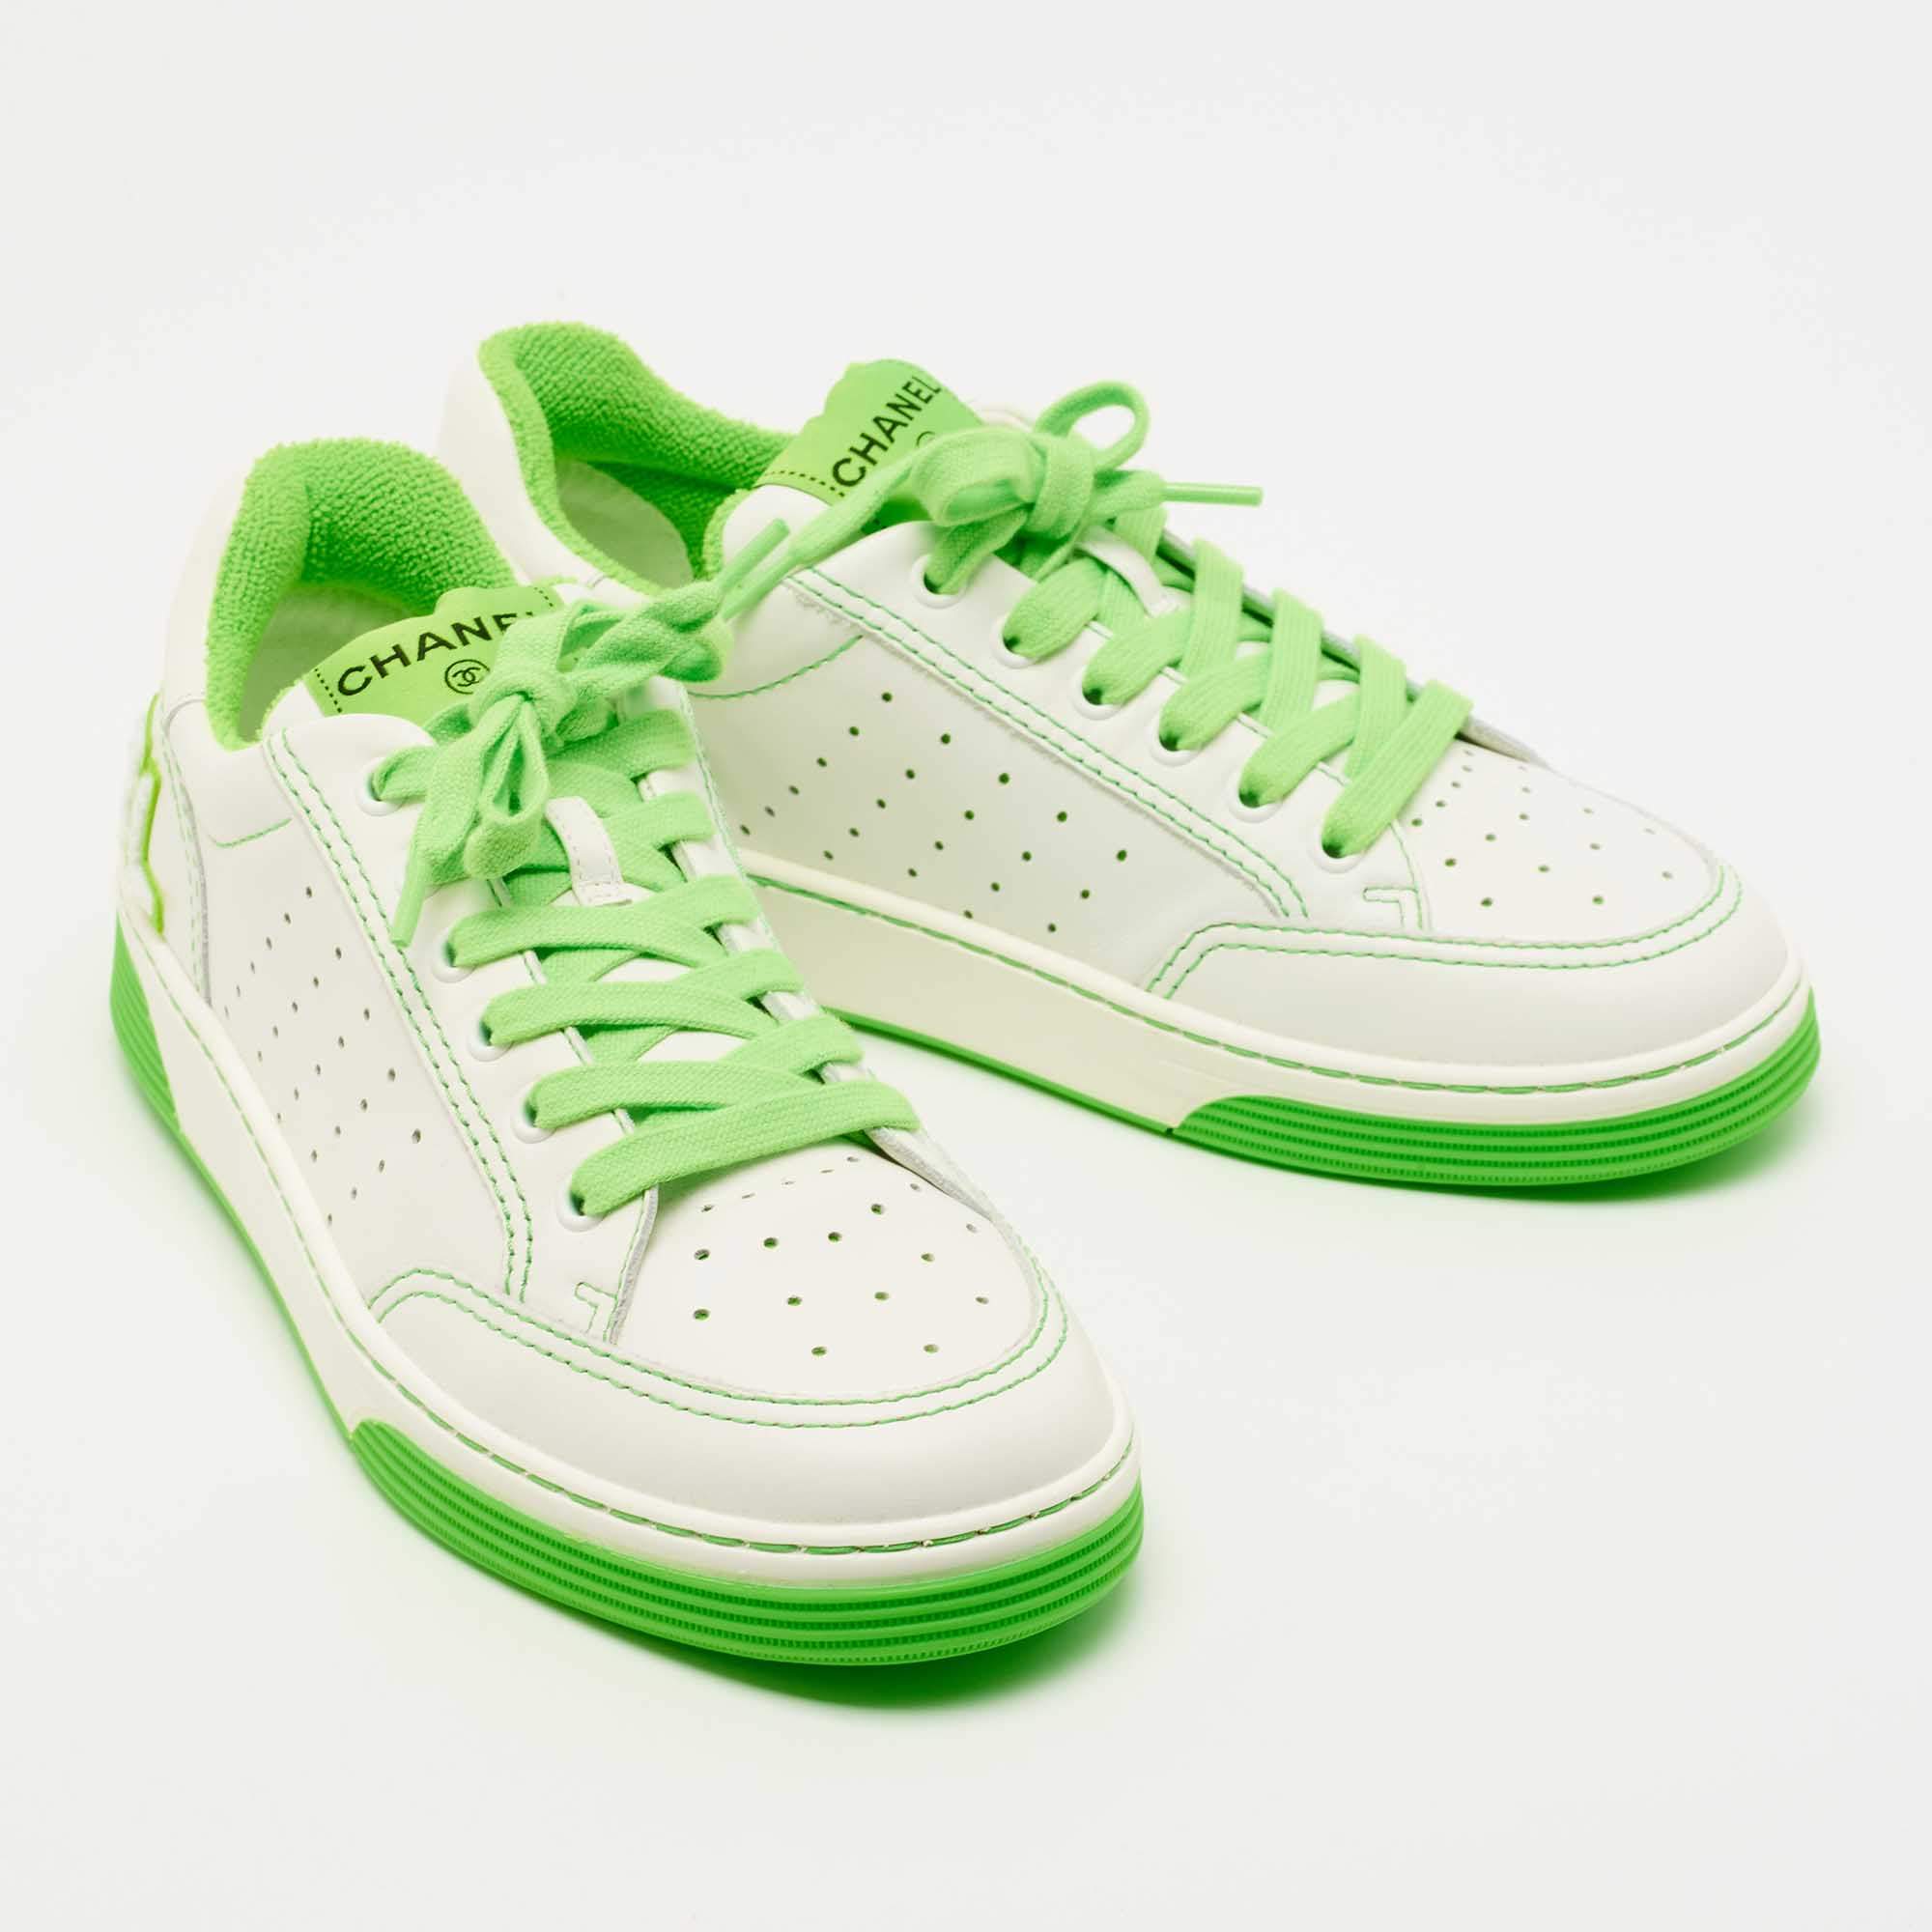 Chanel White/Neon Green Leather 22P Trainer Sneakers Size 38.5 Chanel